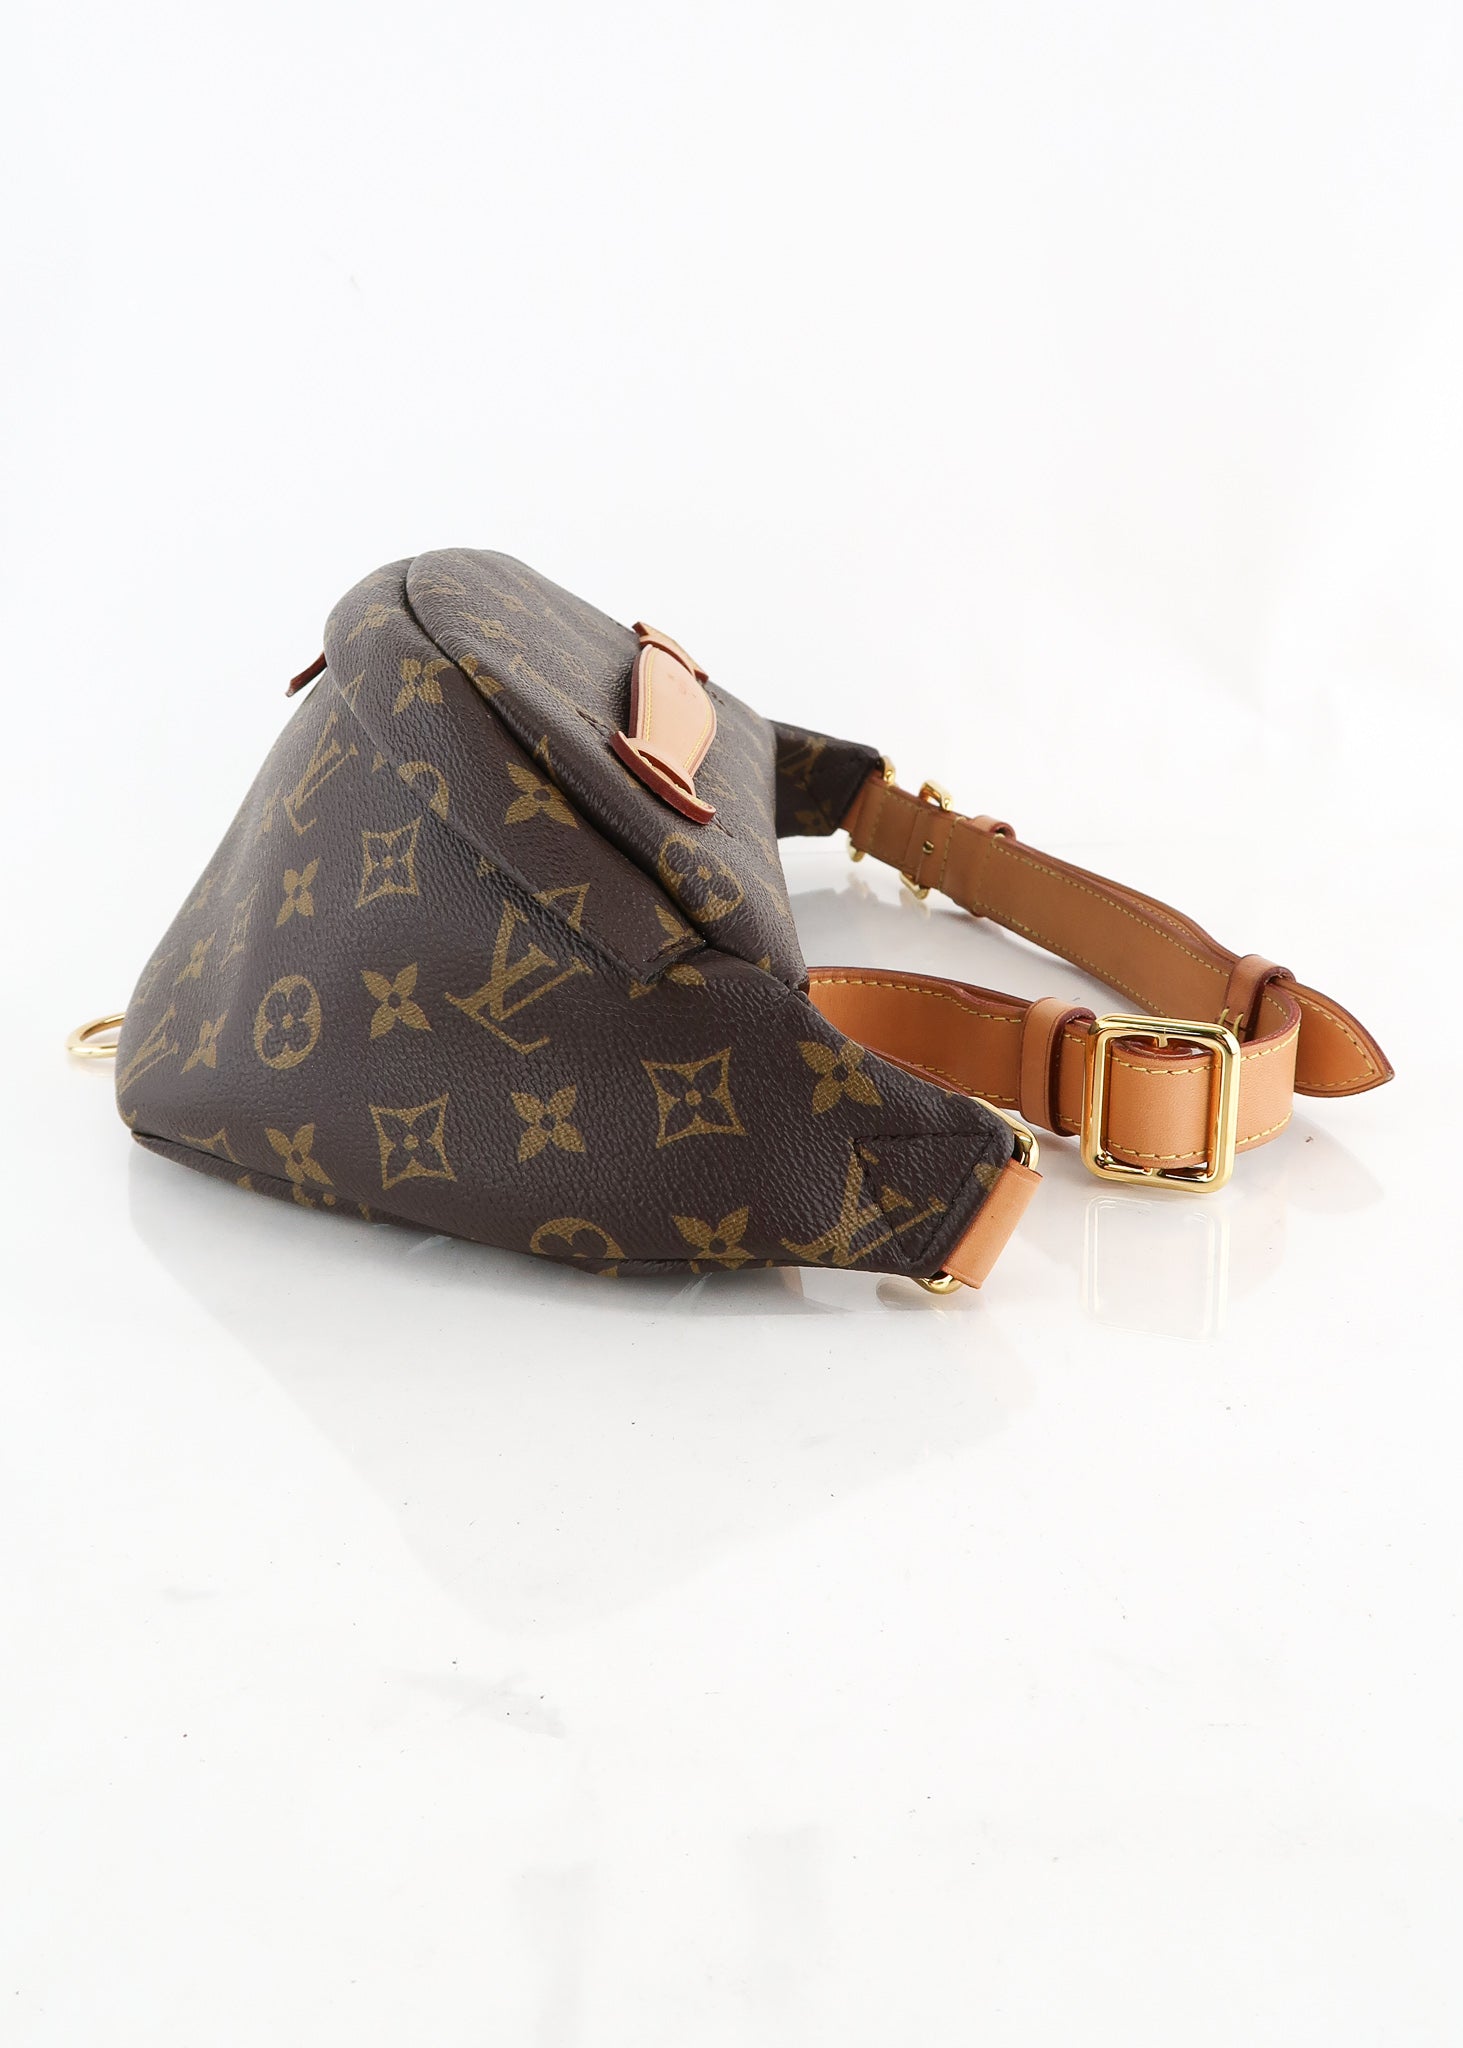 LOUIS VUITTON LV Ray Bum Bag Pouch Monogram Glace Leather Brown M46550  64AC928